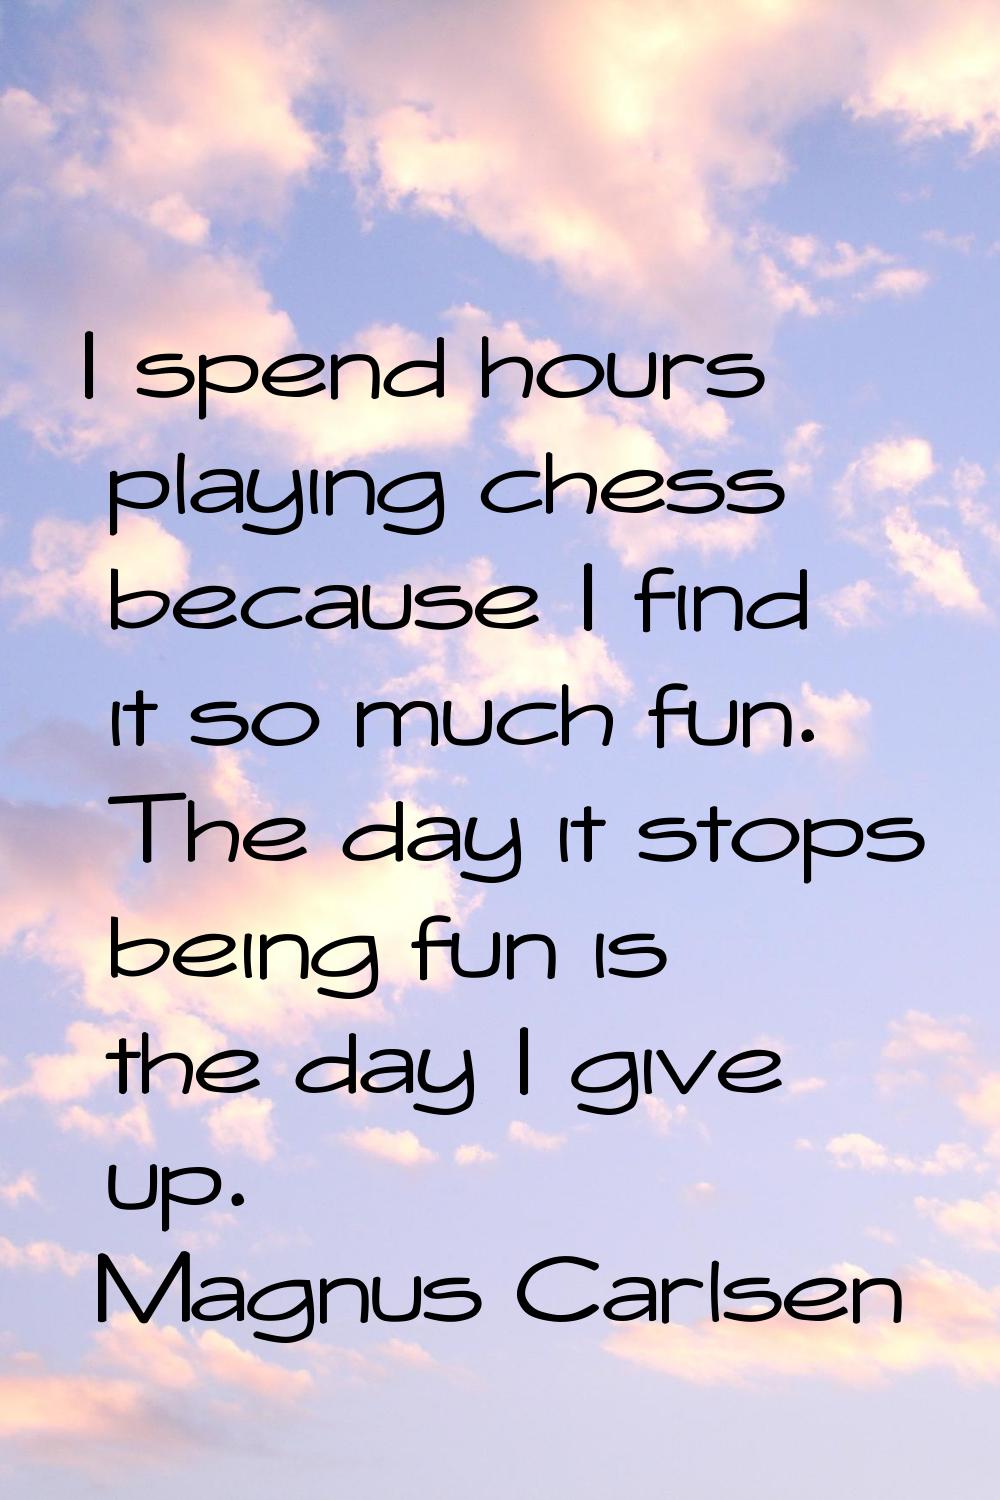 I spend hours playing chess because I find it so much fun. The day it stops being fun is the day I 